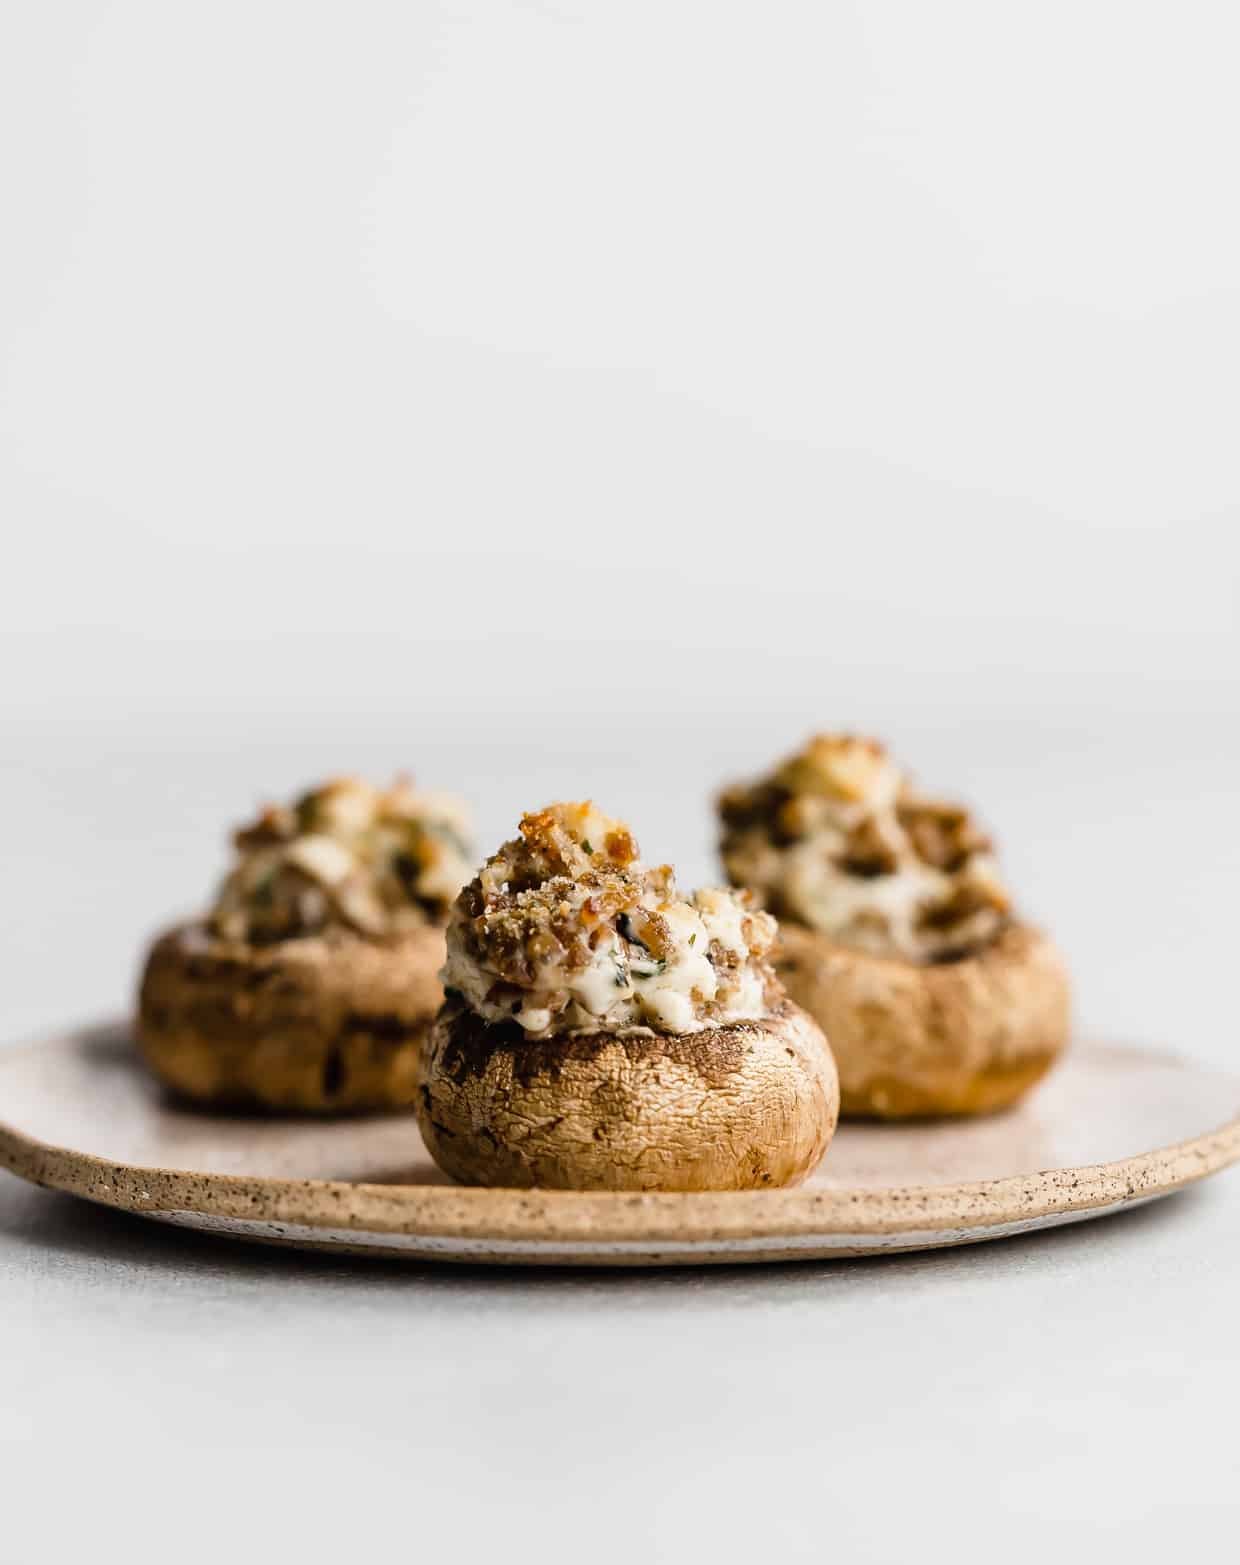 Italian Sausage Stuffed Mushrooms topped with bread crumbs, on a plate against a white background.